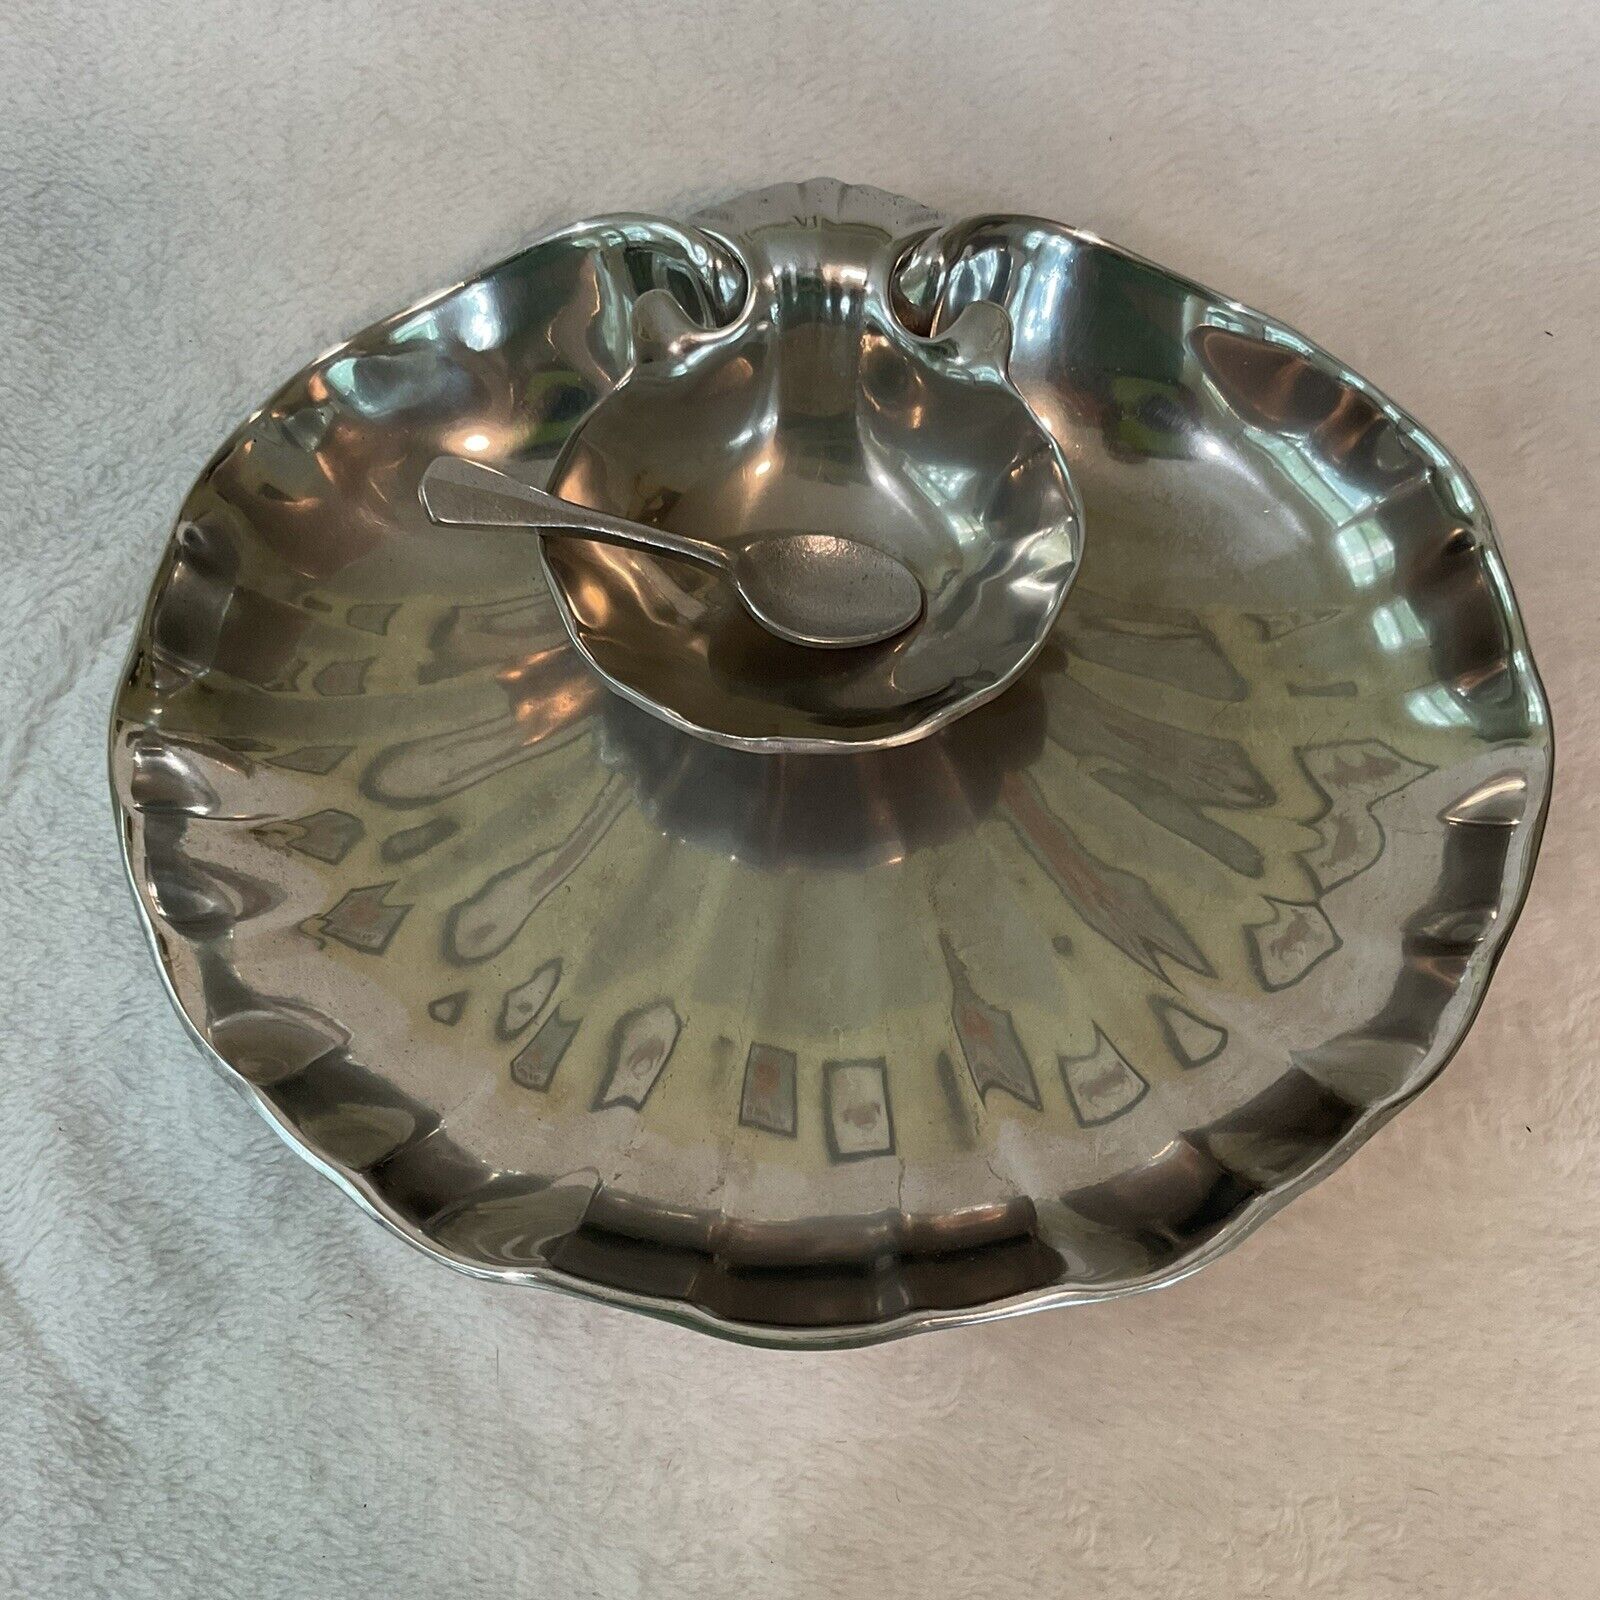 Wilton Co Armetale RWP Hors d\'oeures Chip Dip Tray Clamshell Pewter Bowl Spoon